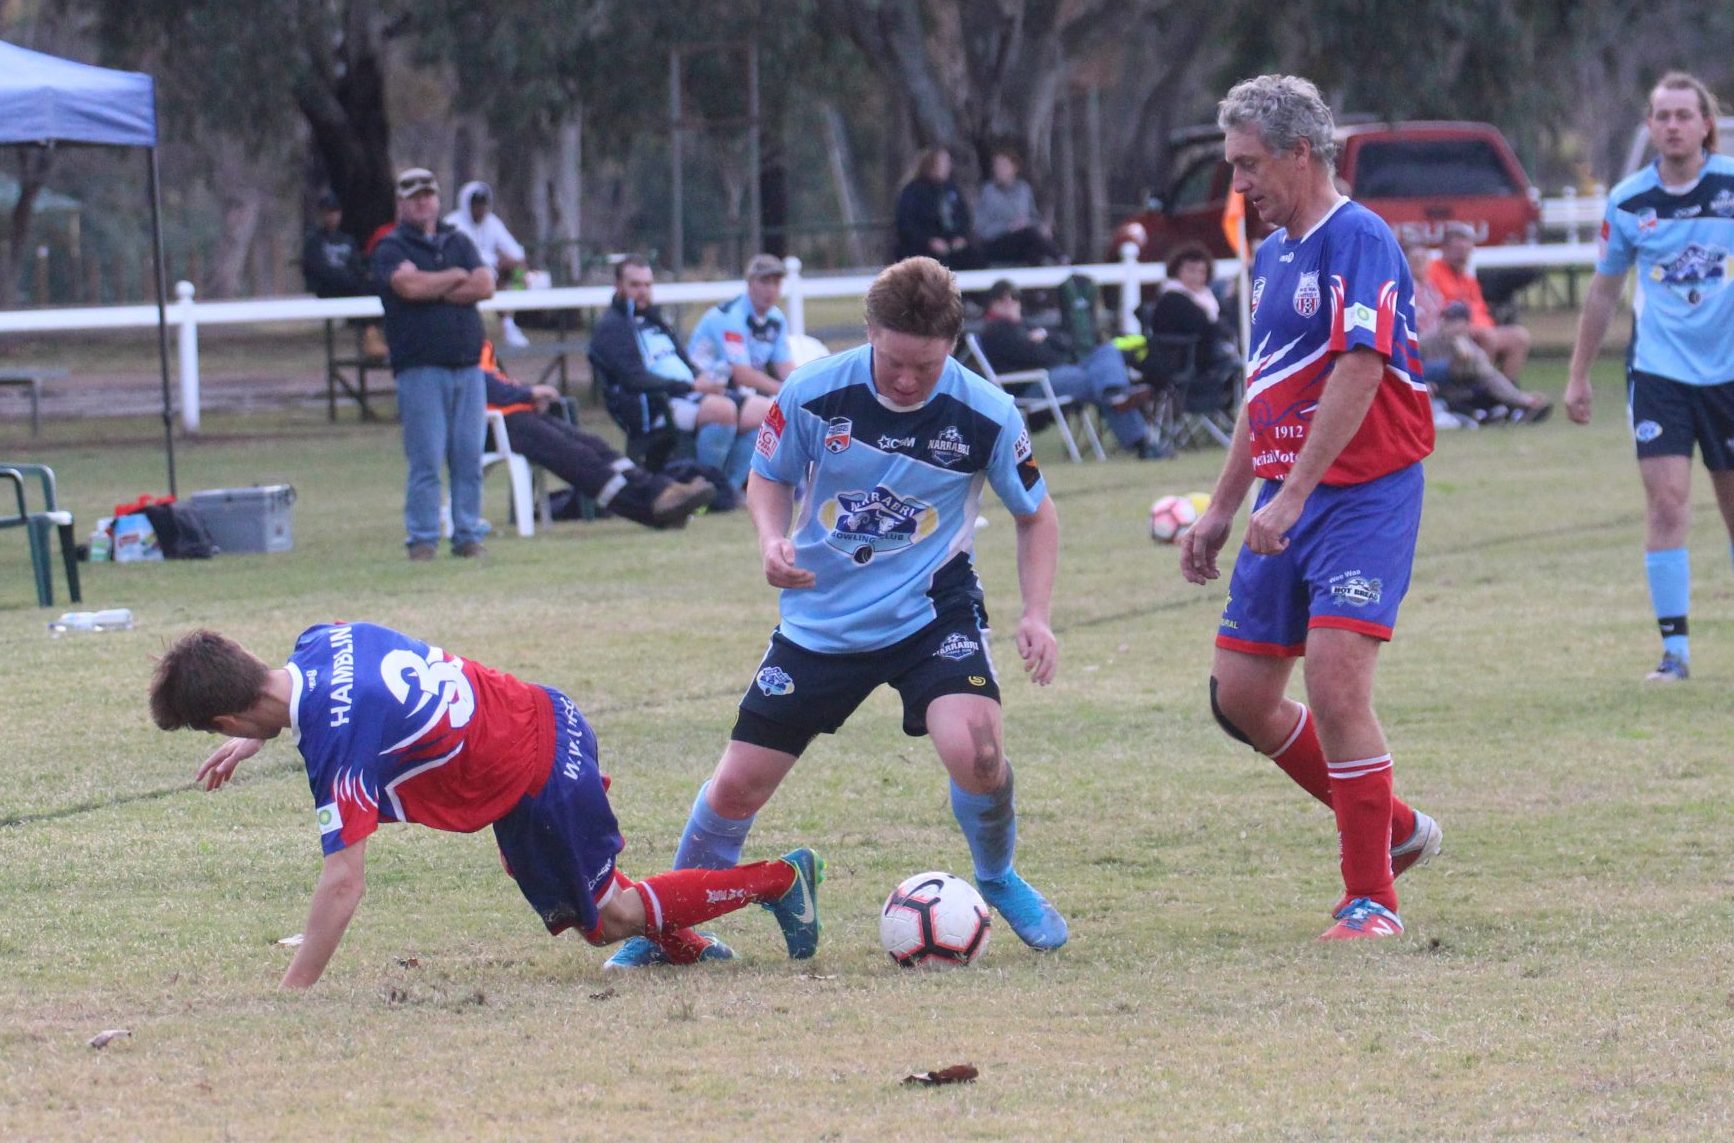 Narrabri Sporties FC downs defending champs Wee Waa in grand final rematch